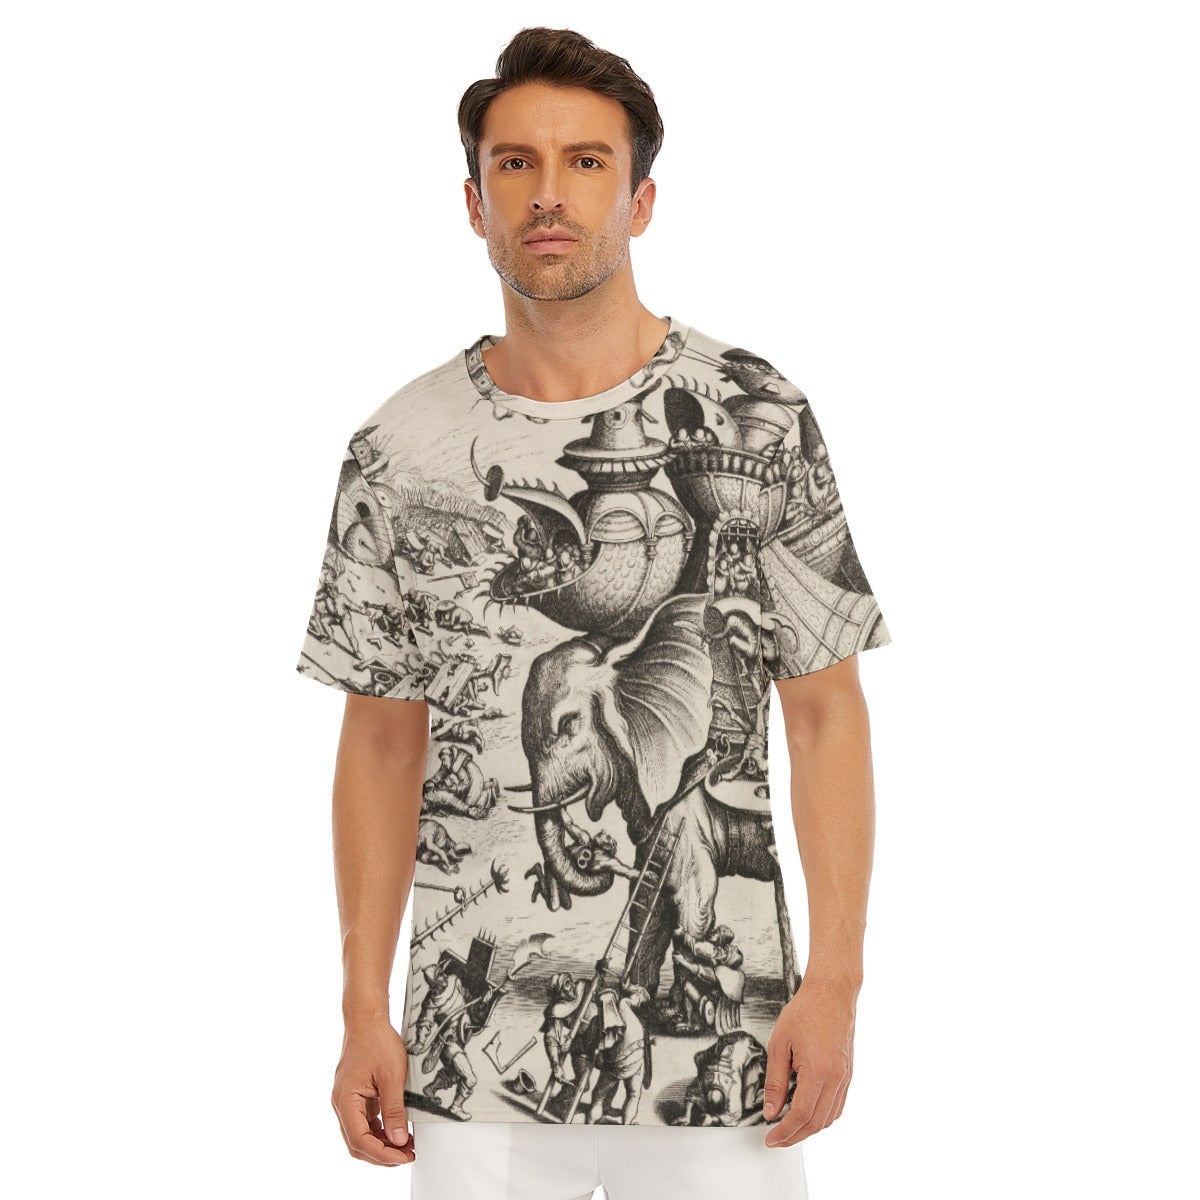 The Besieged Elephant by Hieronymus Bosch T-Shirt